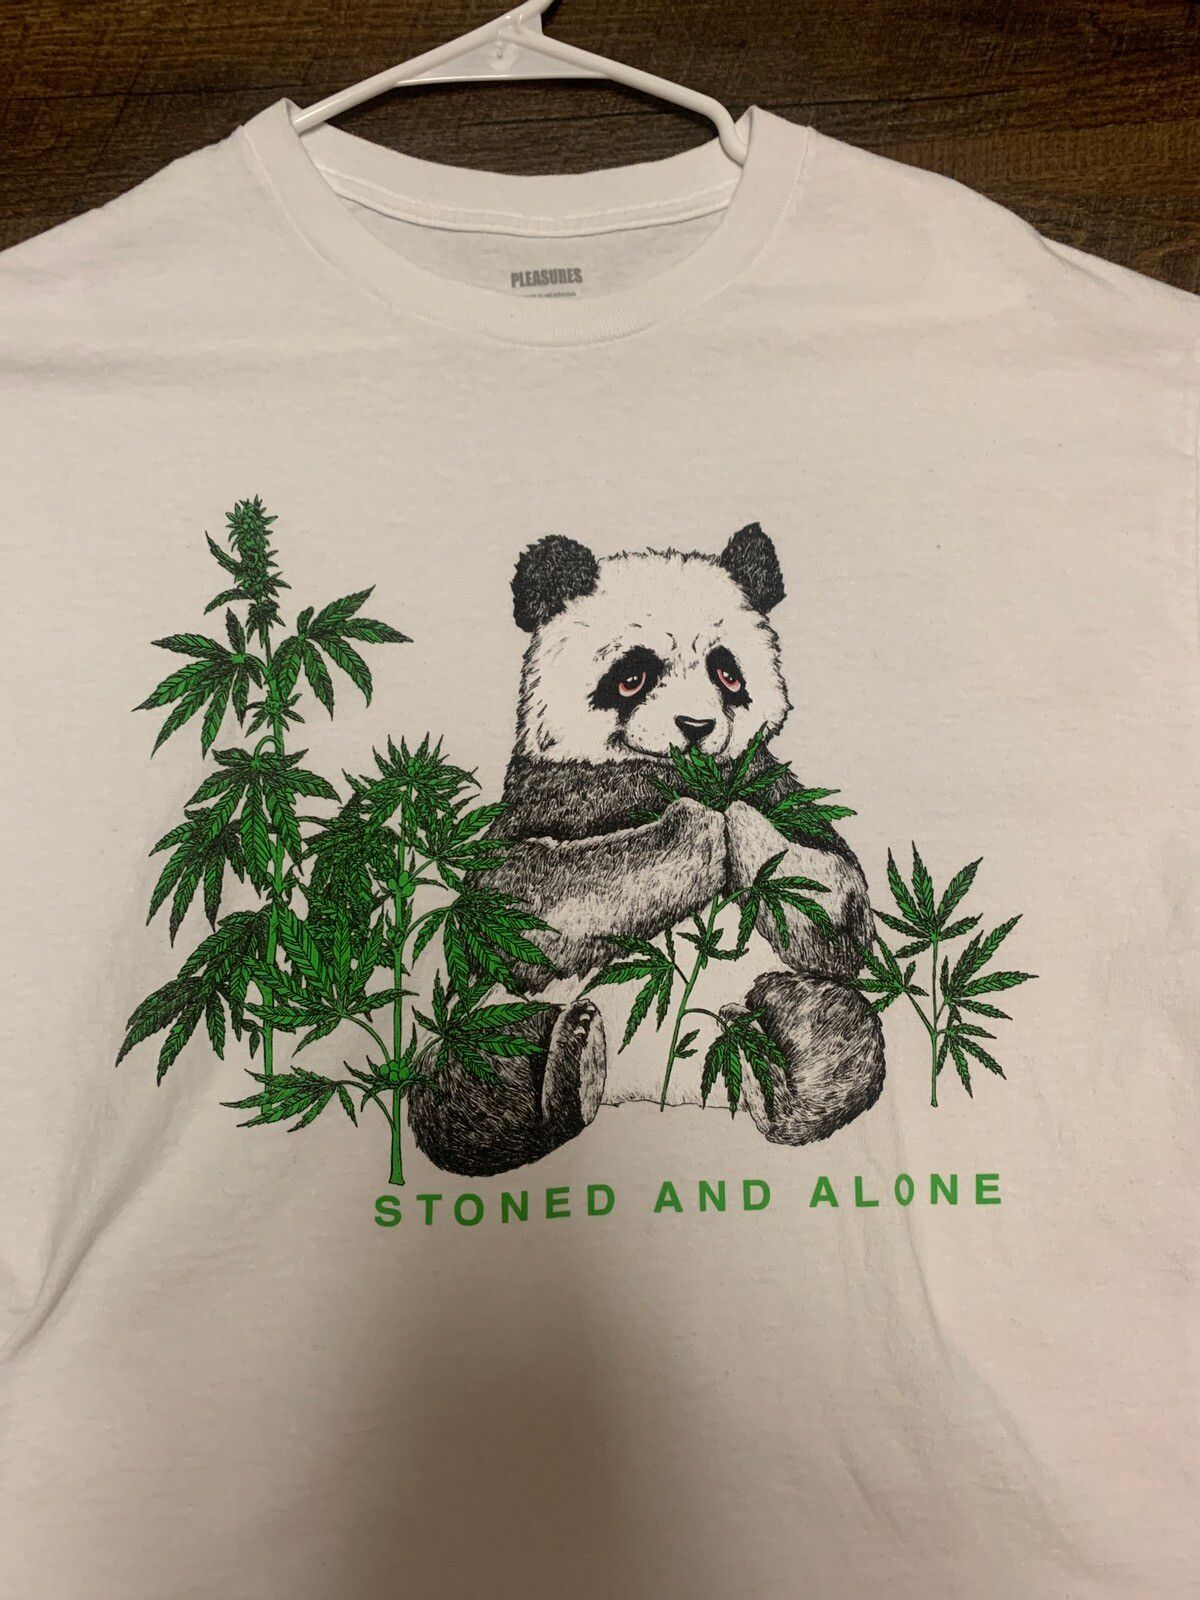 Pleasures Pleasures short sleeve “Stoned and Alone” Size US L / EU 52-54 / 3 - 1 Preview